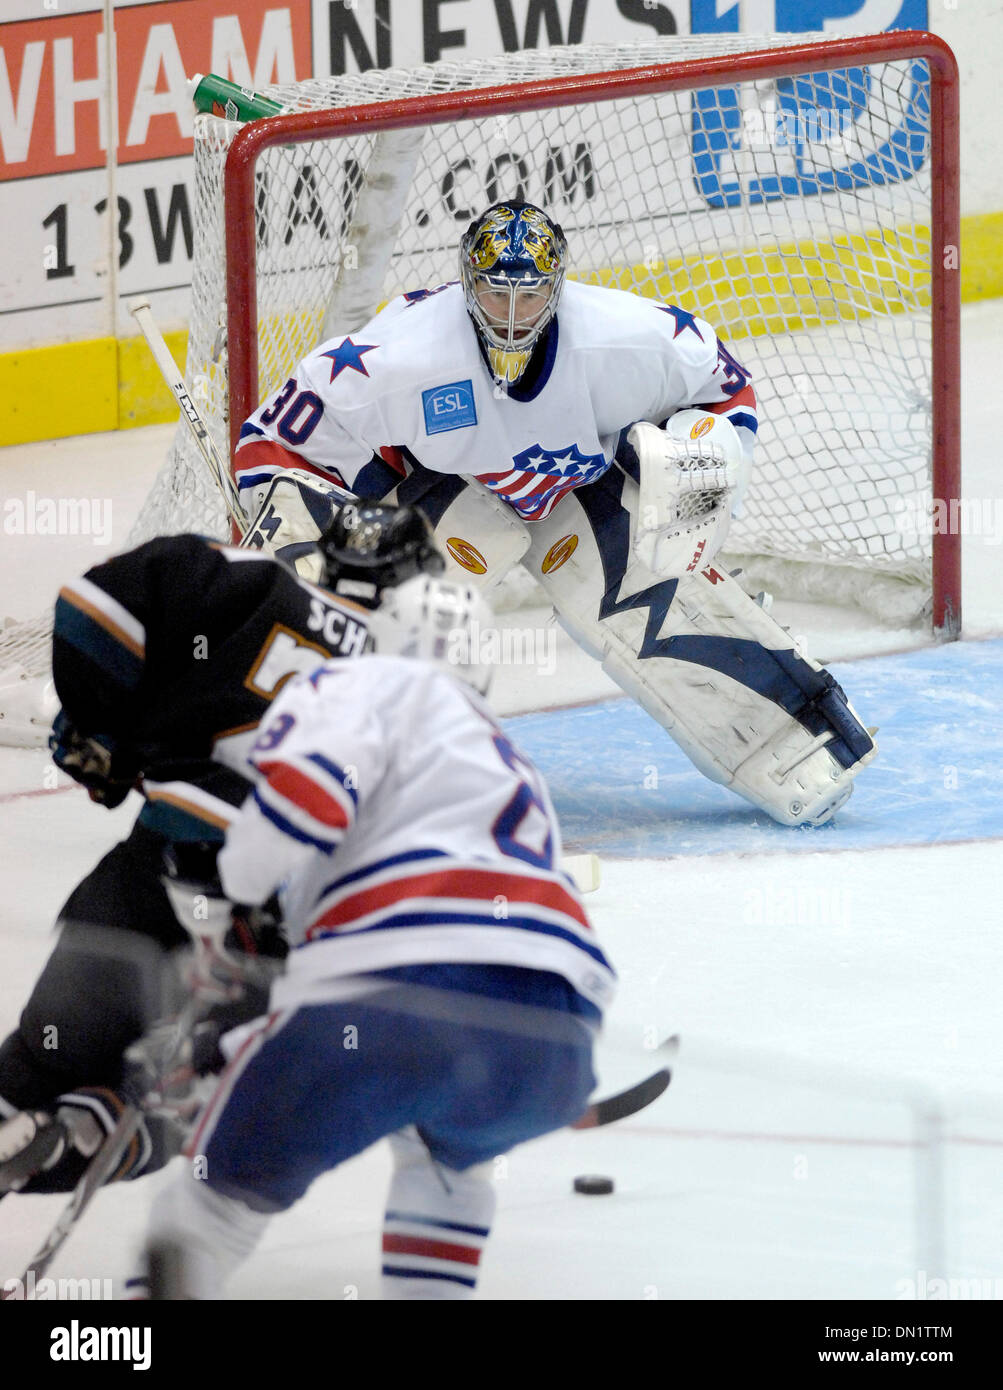 November 17, 2006: AHL - Rochester's Craig Anderson gets set as Manitoba goes on the offense. The Manitoba Canucks at Rochester Americans at the Blue Cross Arena at the War Memorial Auditorium. Rochester defeated Manitoba 4 to 3 in OT.(Credit Image: © Alan Schwartz/Cal Sport Media) Stock Photo